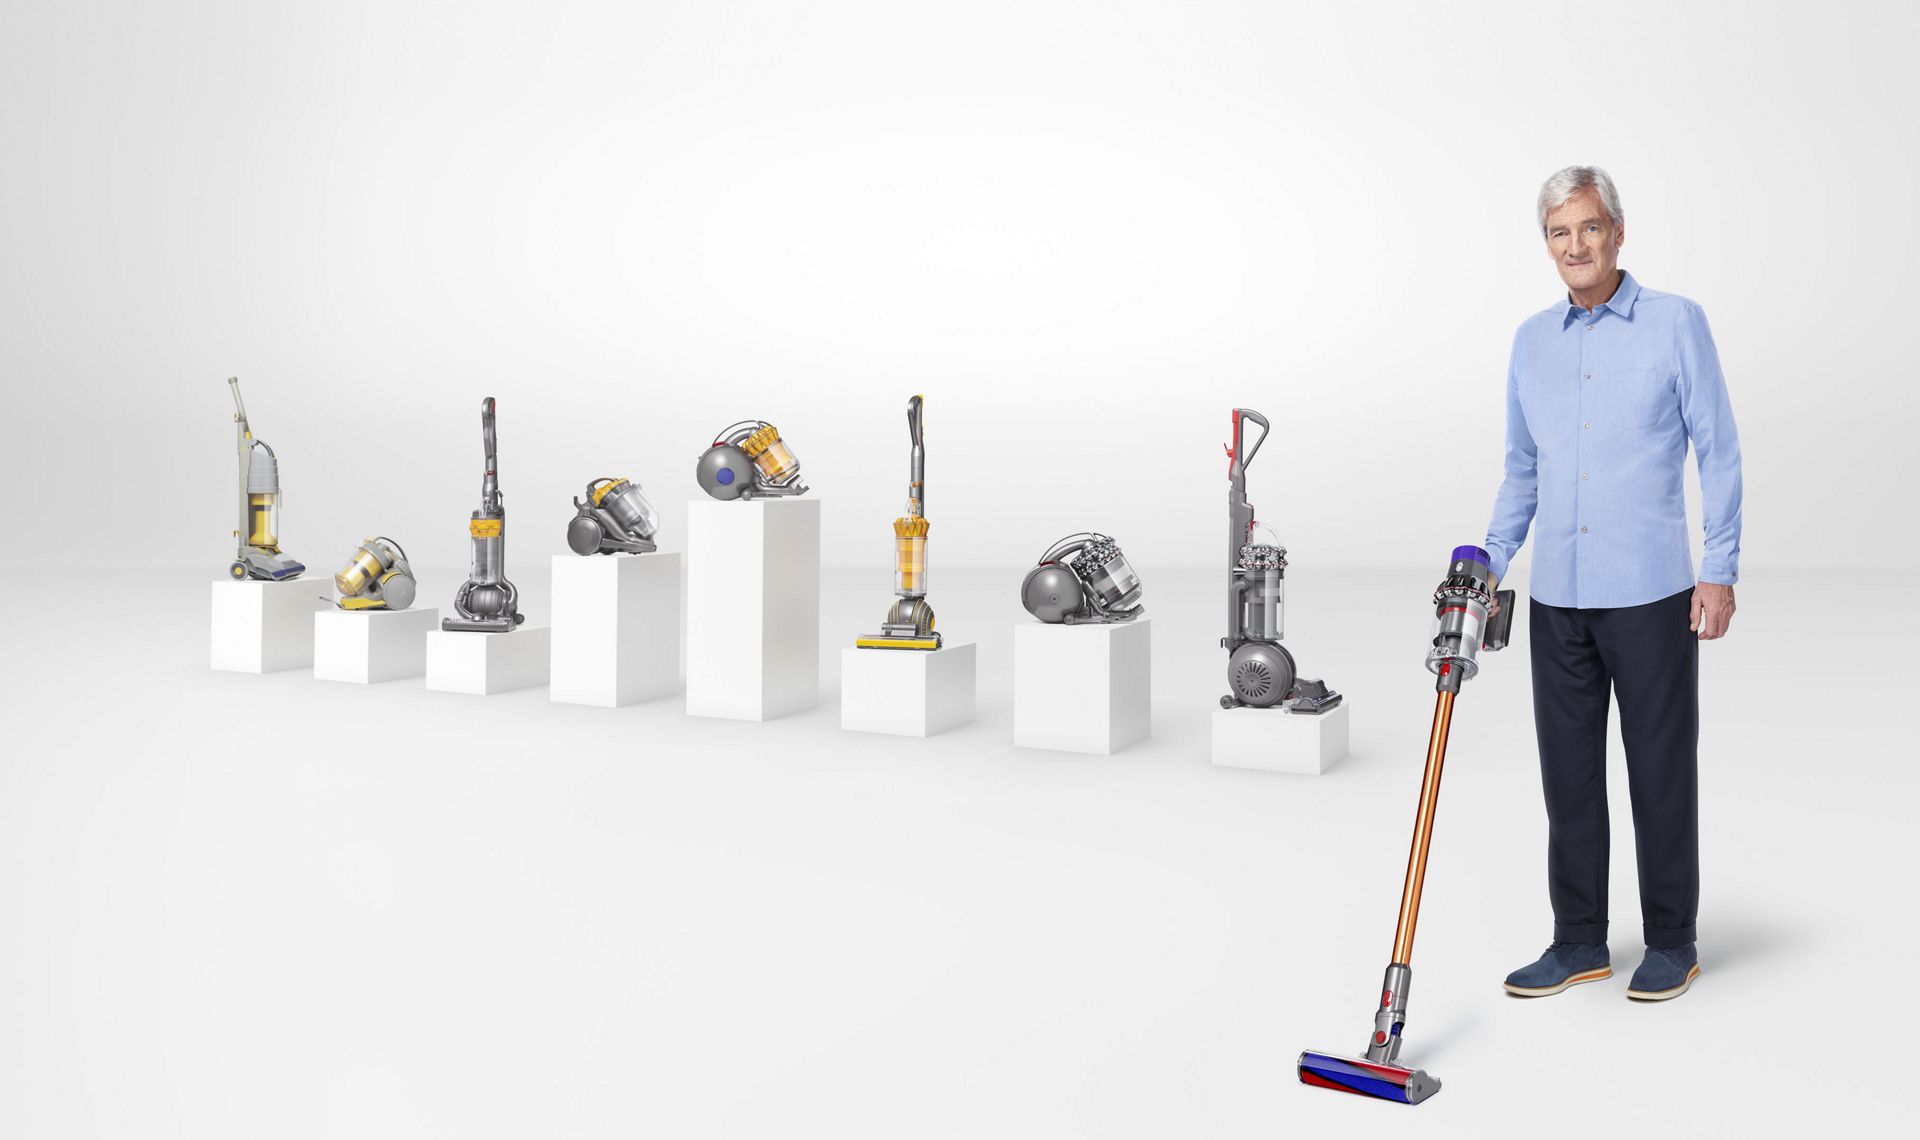 dyson vacuum engineering story v10 james cleaner cleaners cord vacuums technology cyclone evolution begins era play engineers